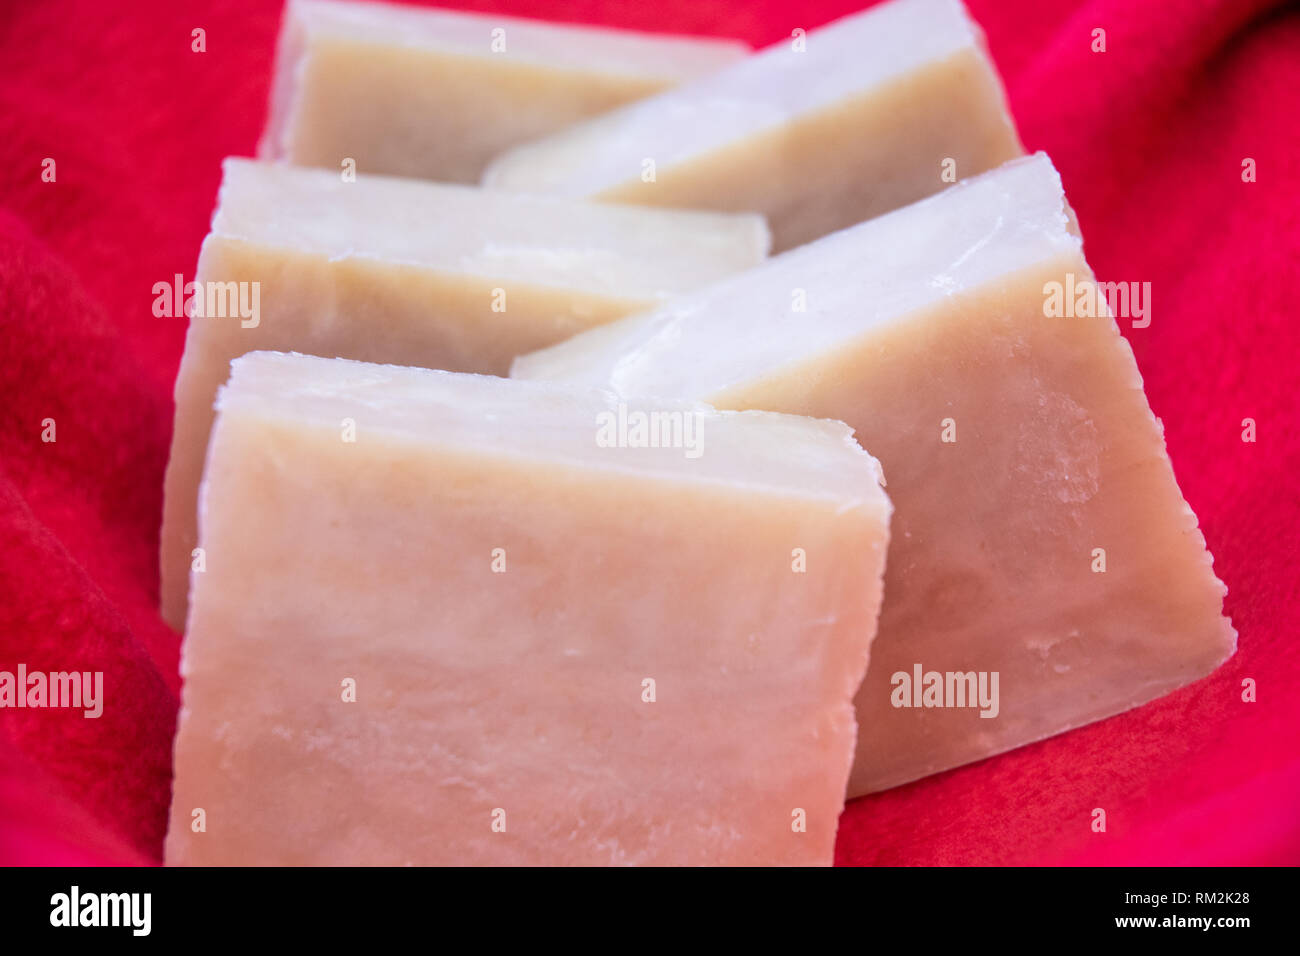 Hand crafted soaps on a red cloth. Stock Photo